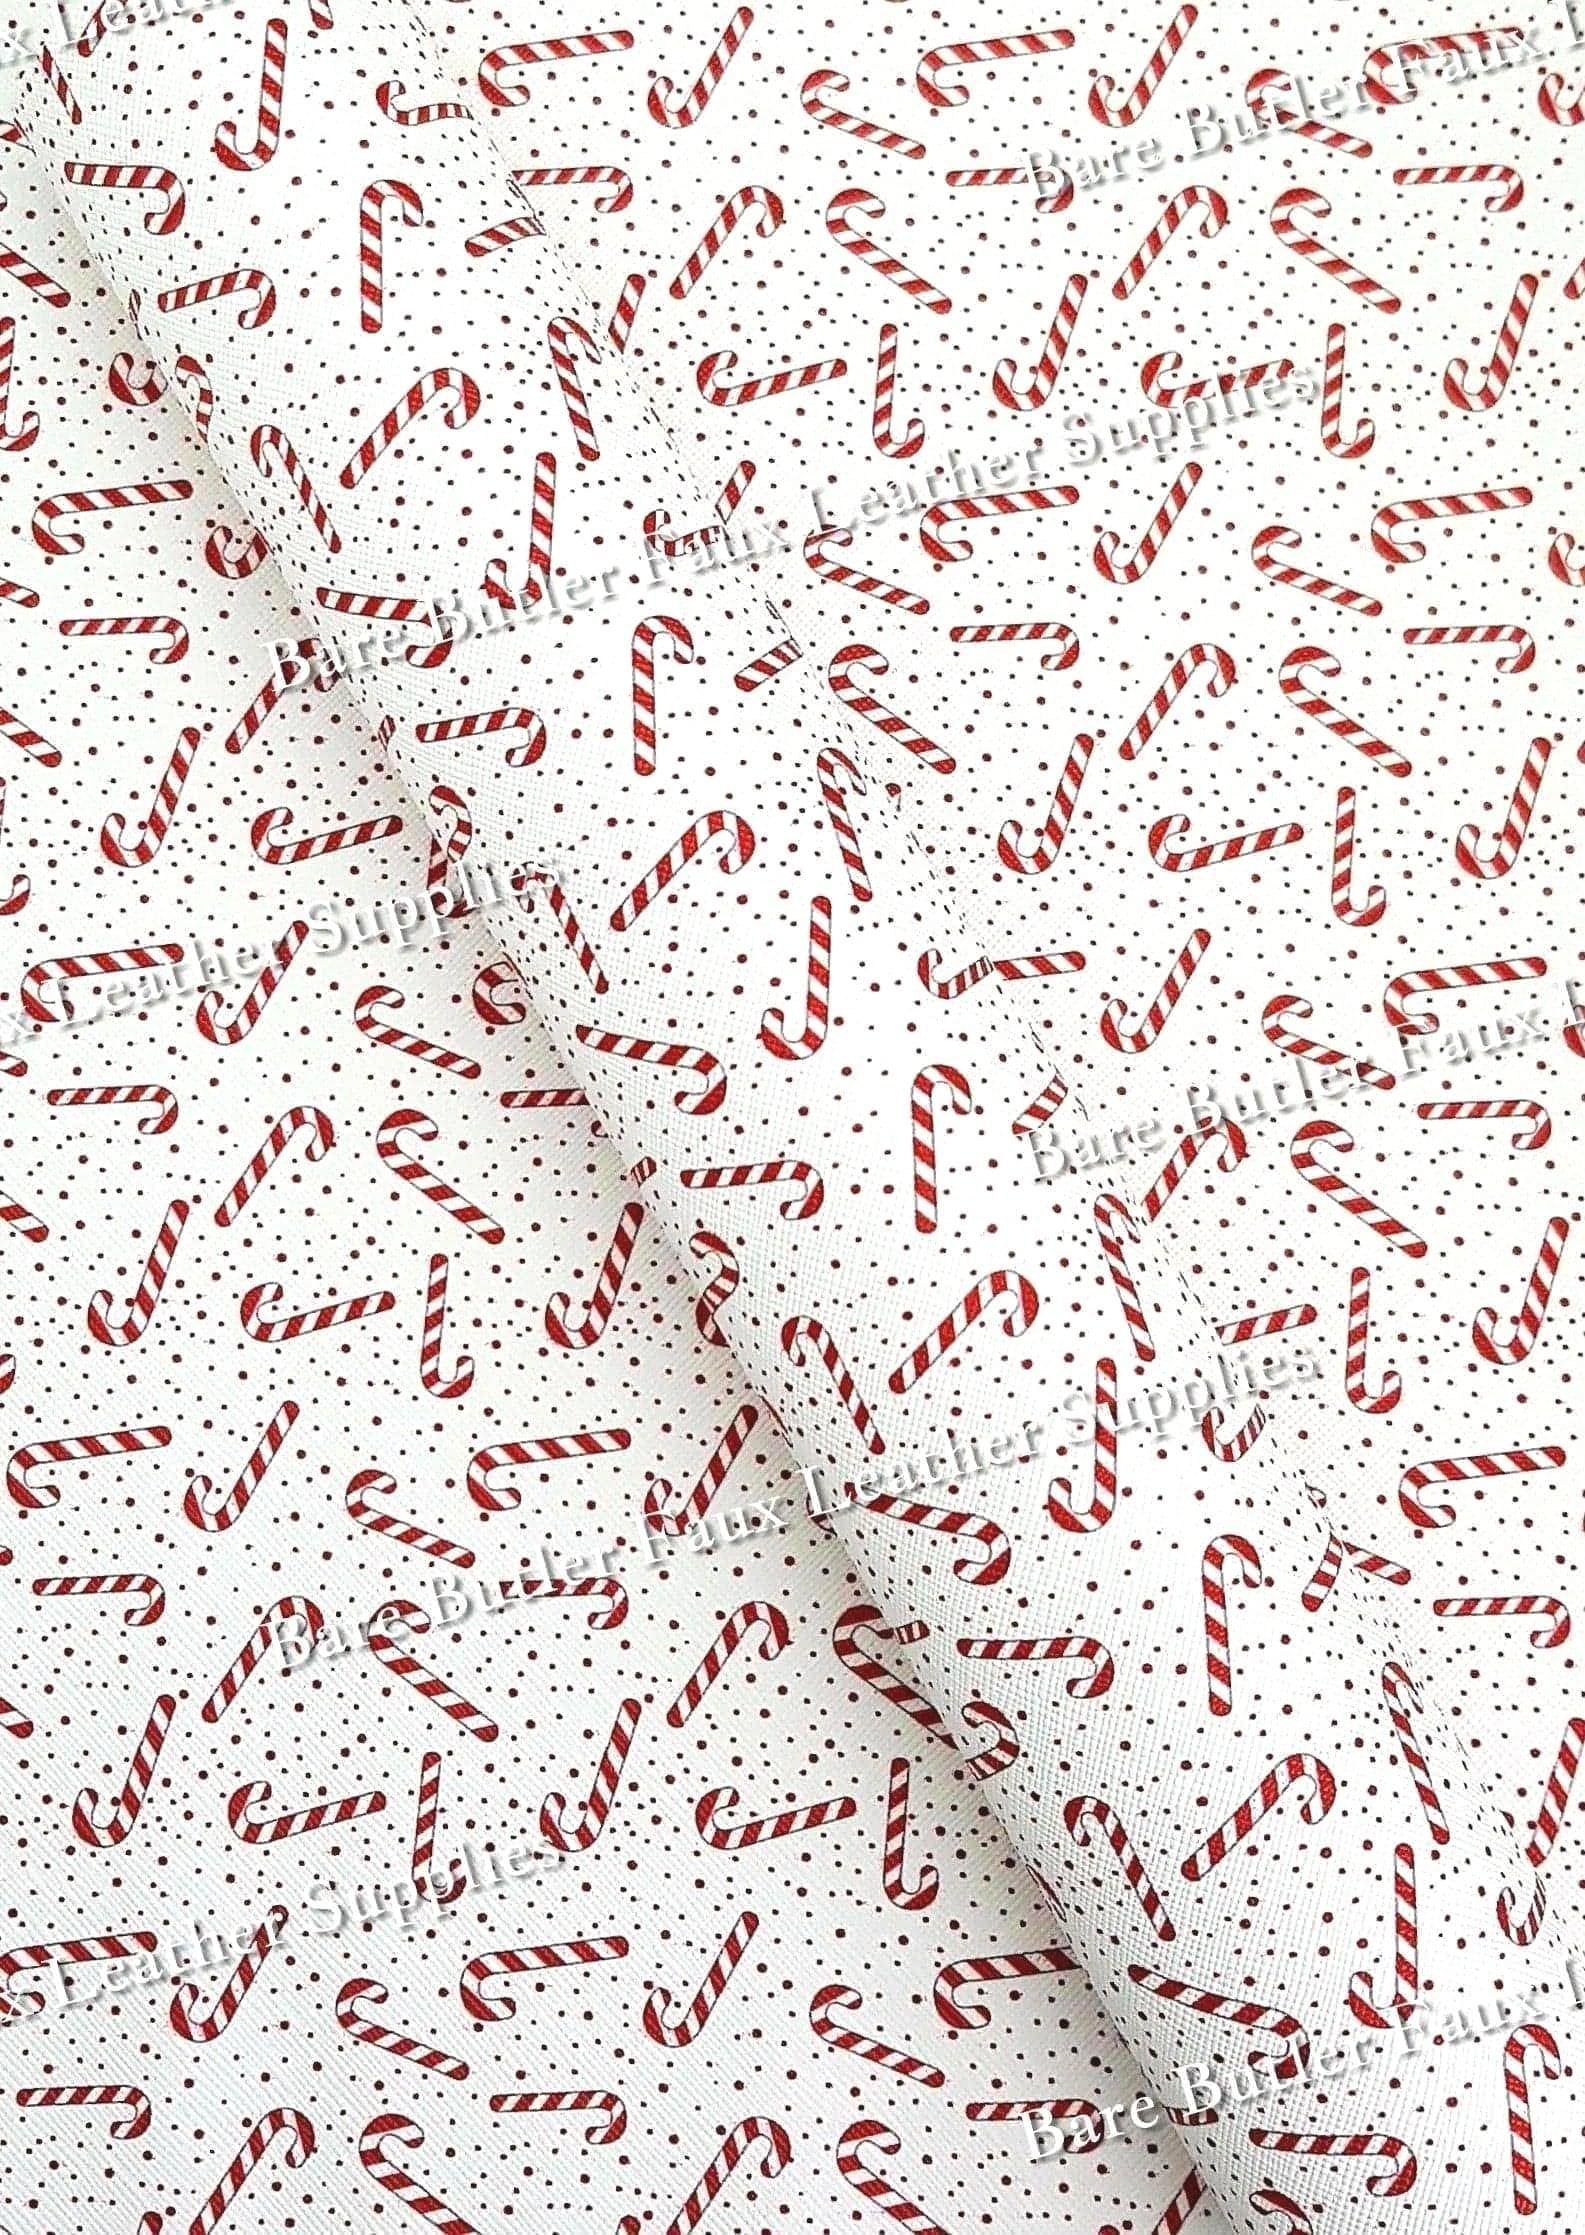 Candy Canes Faux Leather - candy cane, Candy Canes, chimney, christmas, Faux, Faux Leather, Leather, leatherette - Bare Butler Faux Leather Supplies 